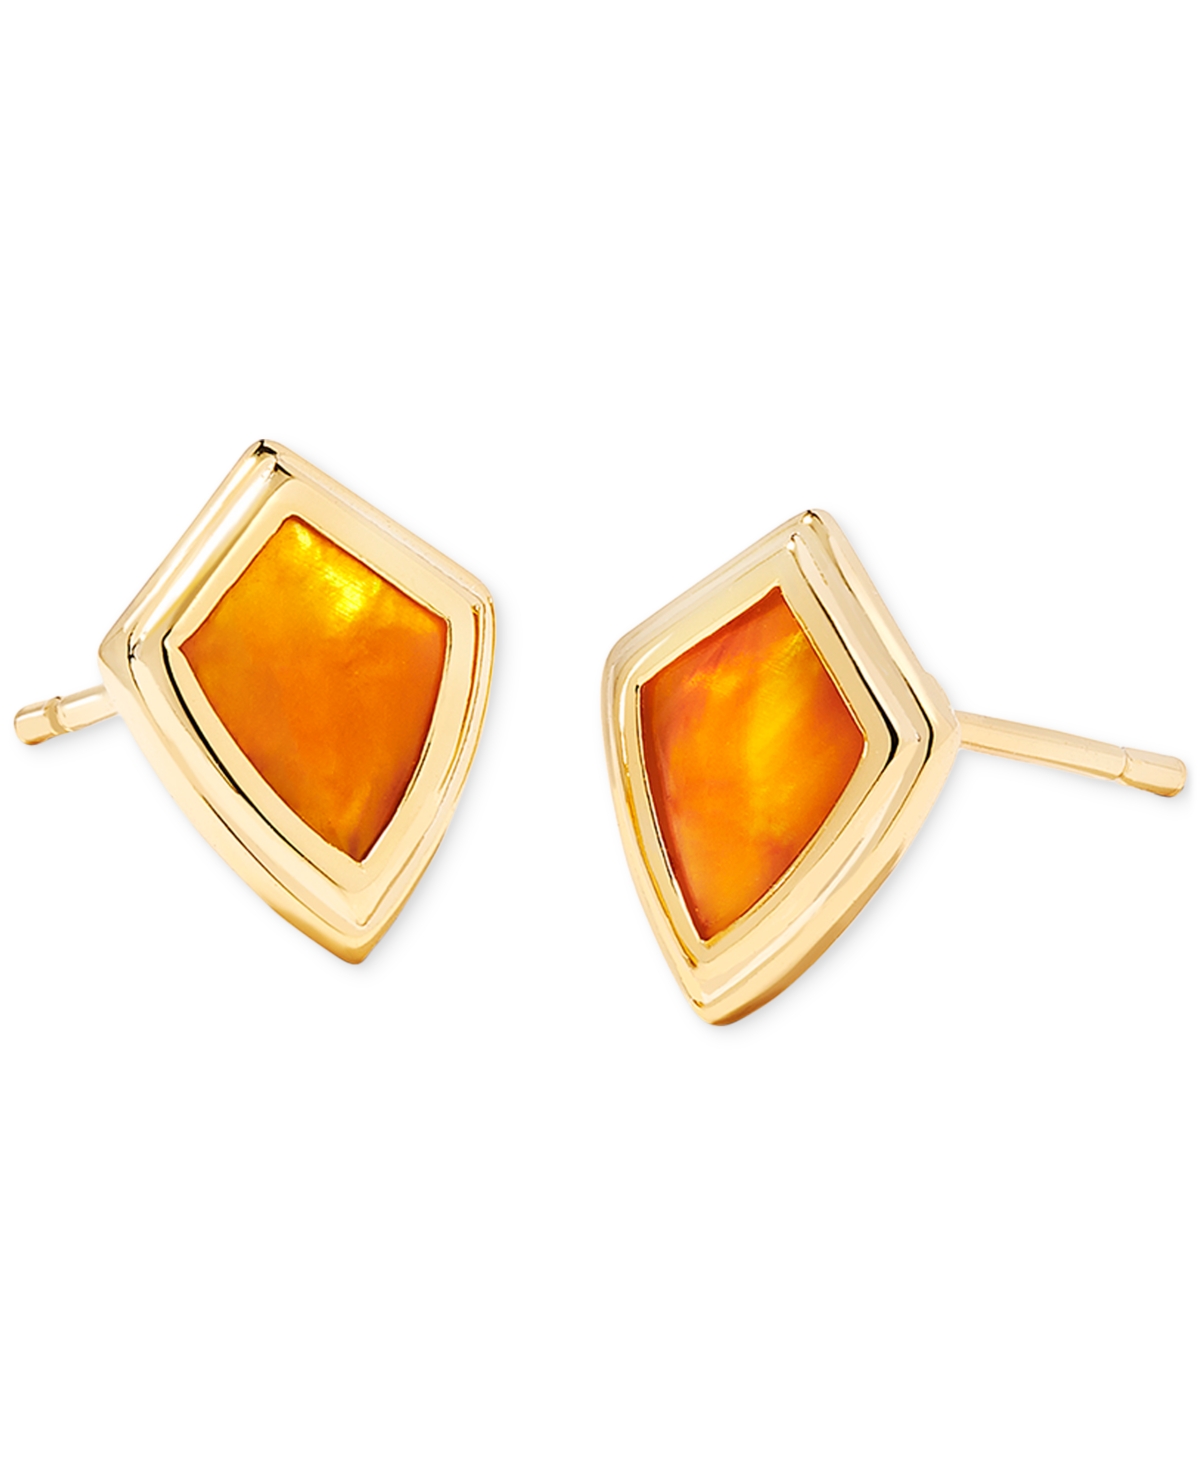 Kendra Scott 14k Gold-plated Framed Stone Stud Earrings In Marbled Amber Illusion